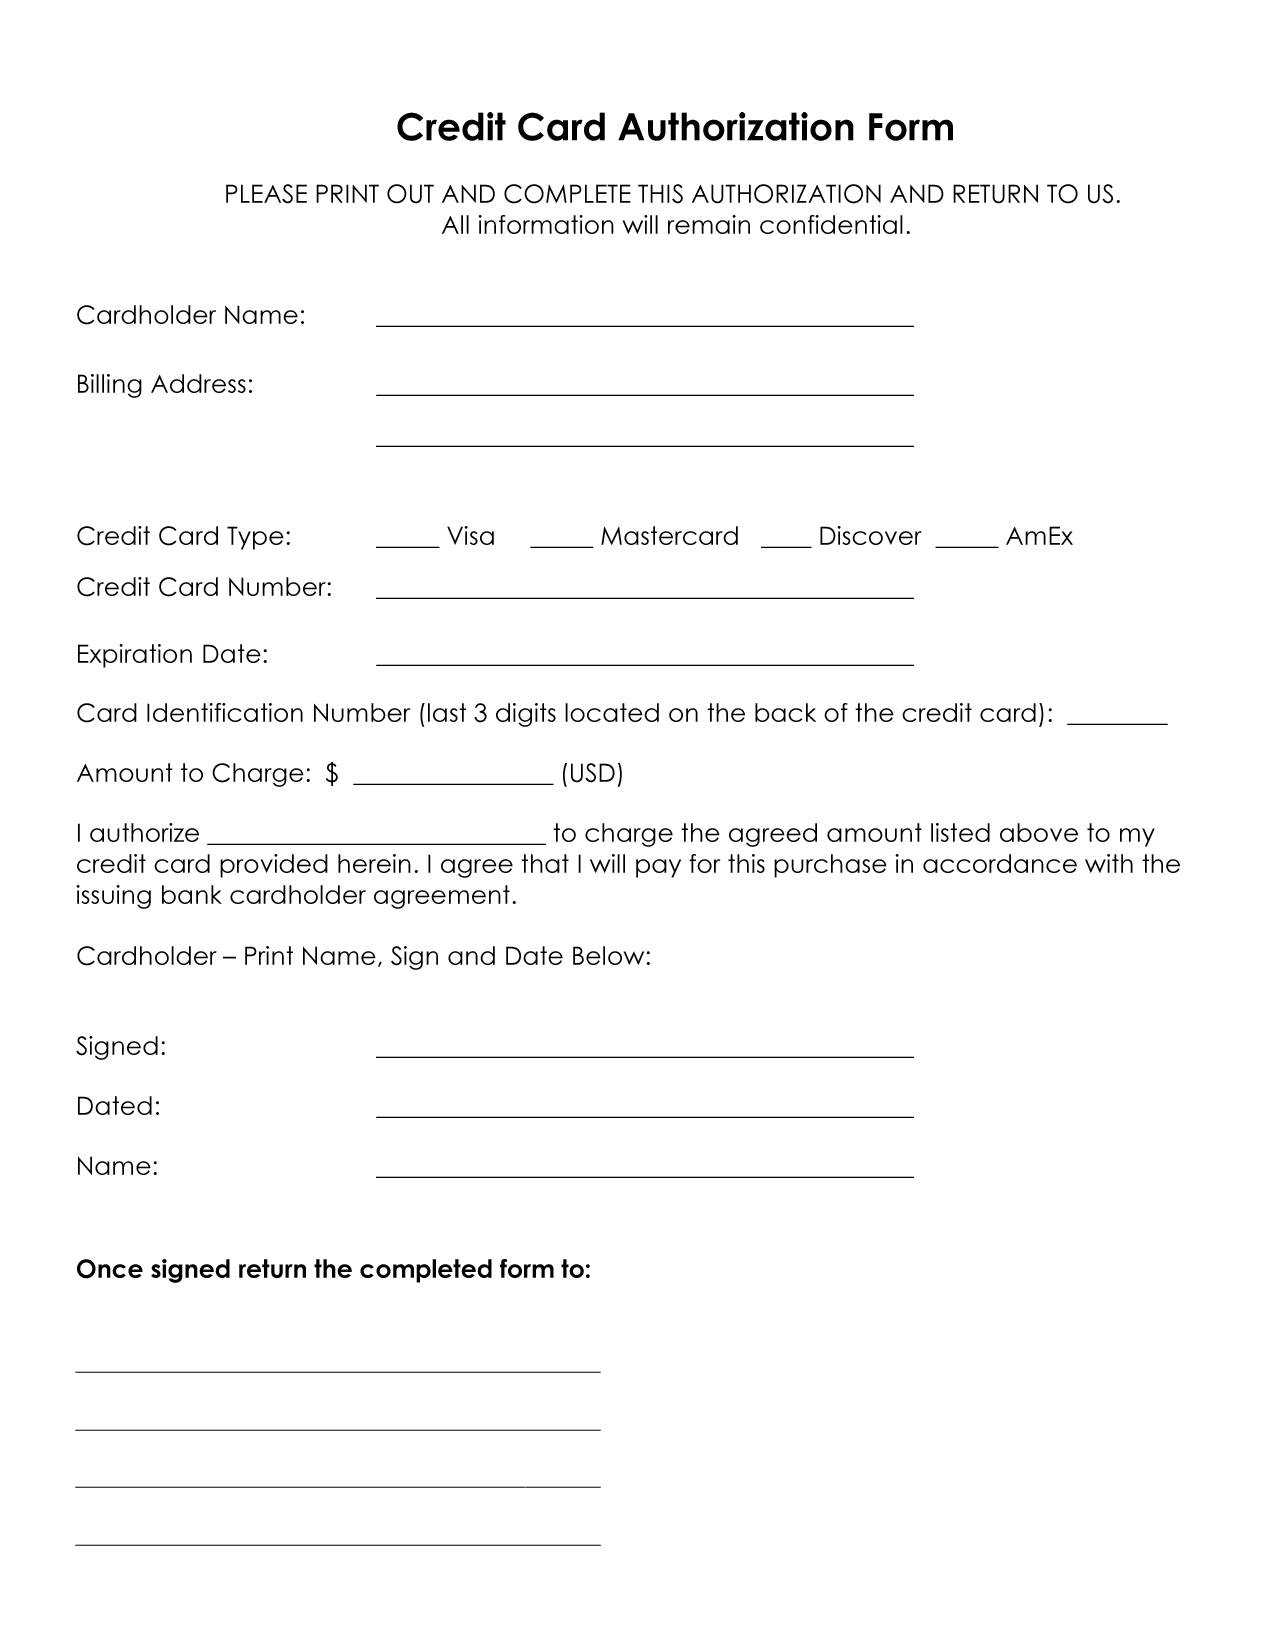 Credit Card Payment Form Word – Milas.westernscandinavia Within Credit Card Billing Authorization Form Template